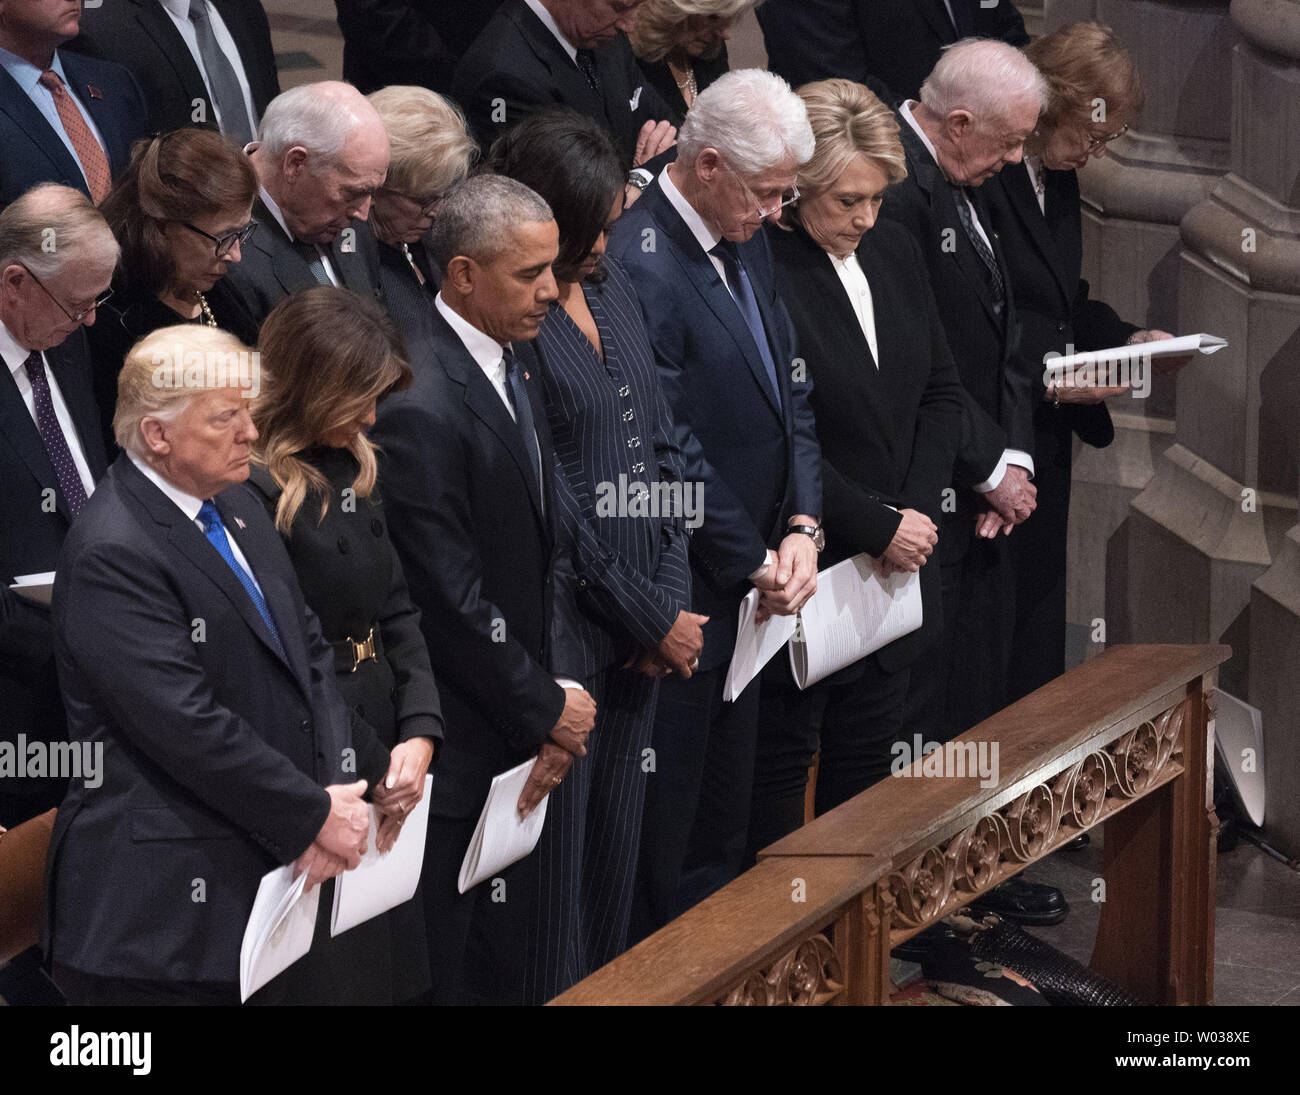 United States President  Donald J. Trump, First Lady Melania Trump, Barack Obama, Michelle Obama, Bill Clinton, Hillary Clinton, Jimmy Carter and Rosalyn Carter attend the state funeral service of former President George W. Bush at the National Cathedral on December 5, 2018 in Washington, DC. Photo by Chris Kleponis/UPI Stock Photo